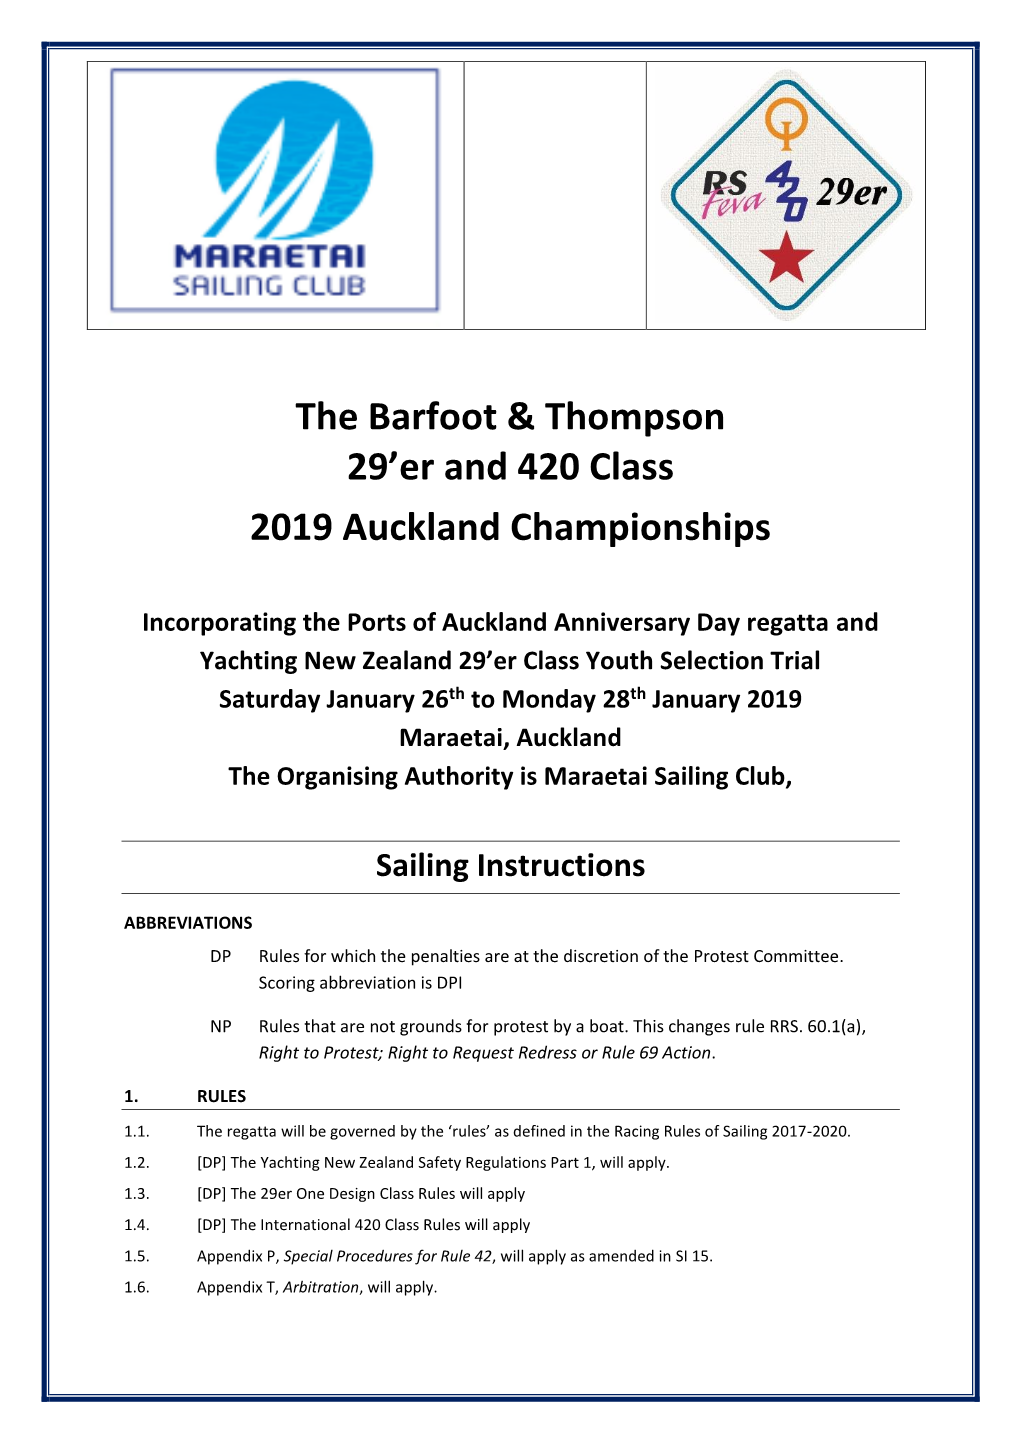 The Barfoot & Thompson 29'Er and 420 Class 2019 Auckland